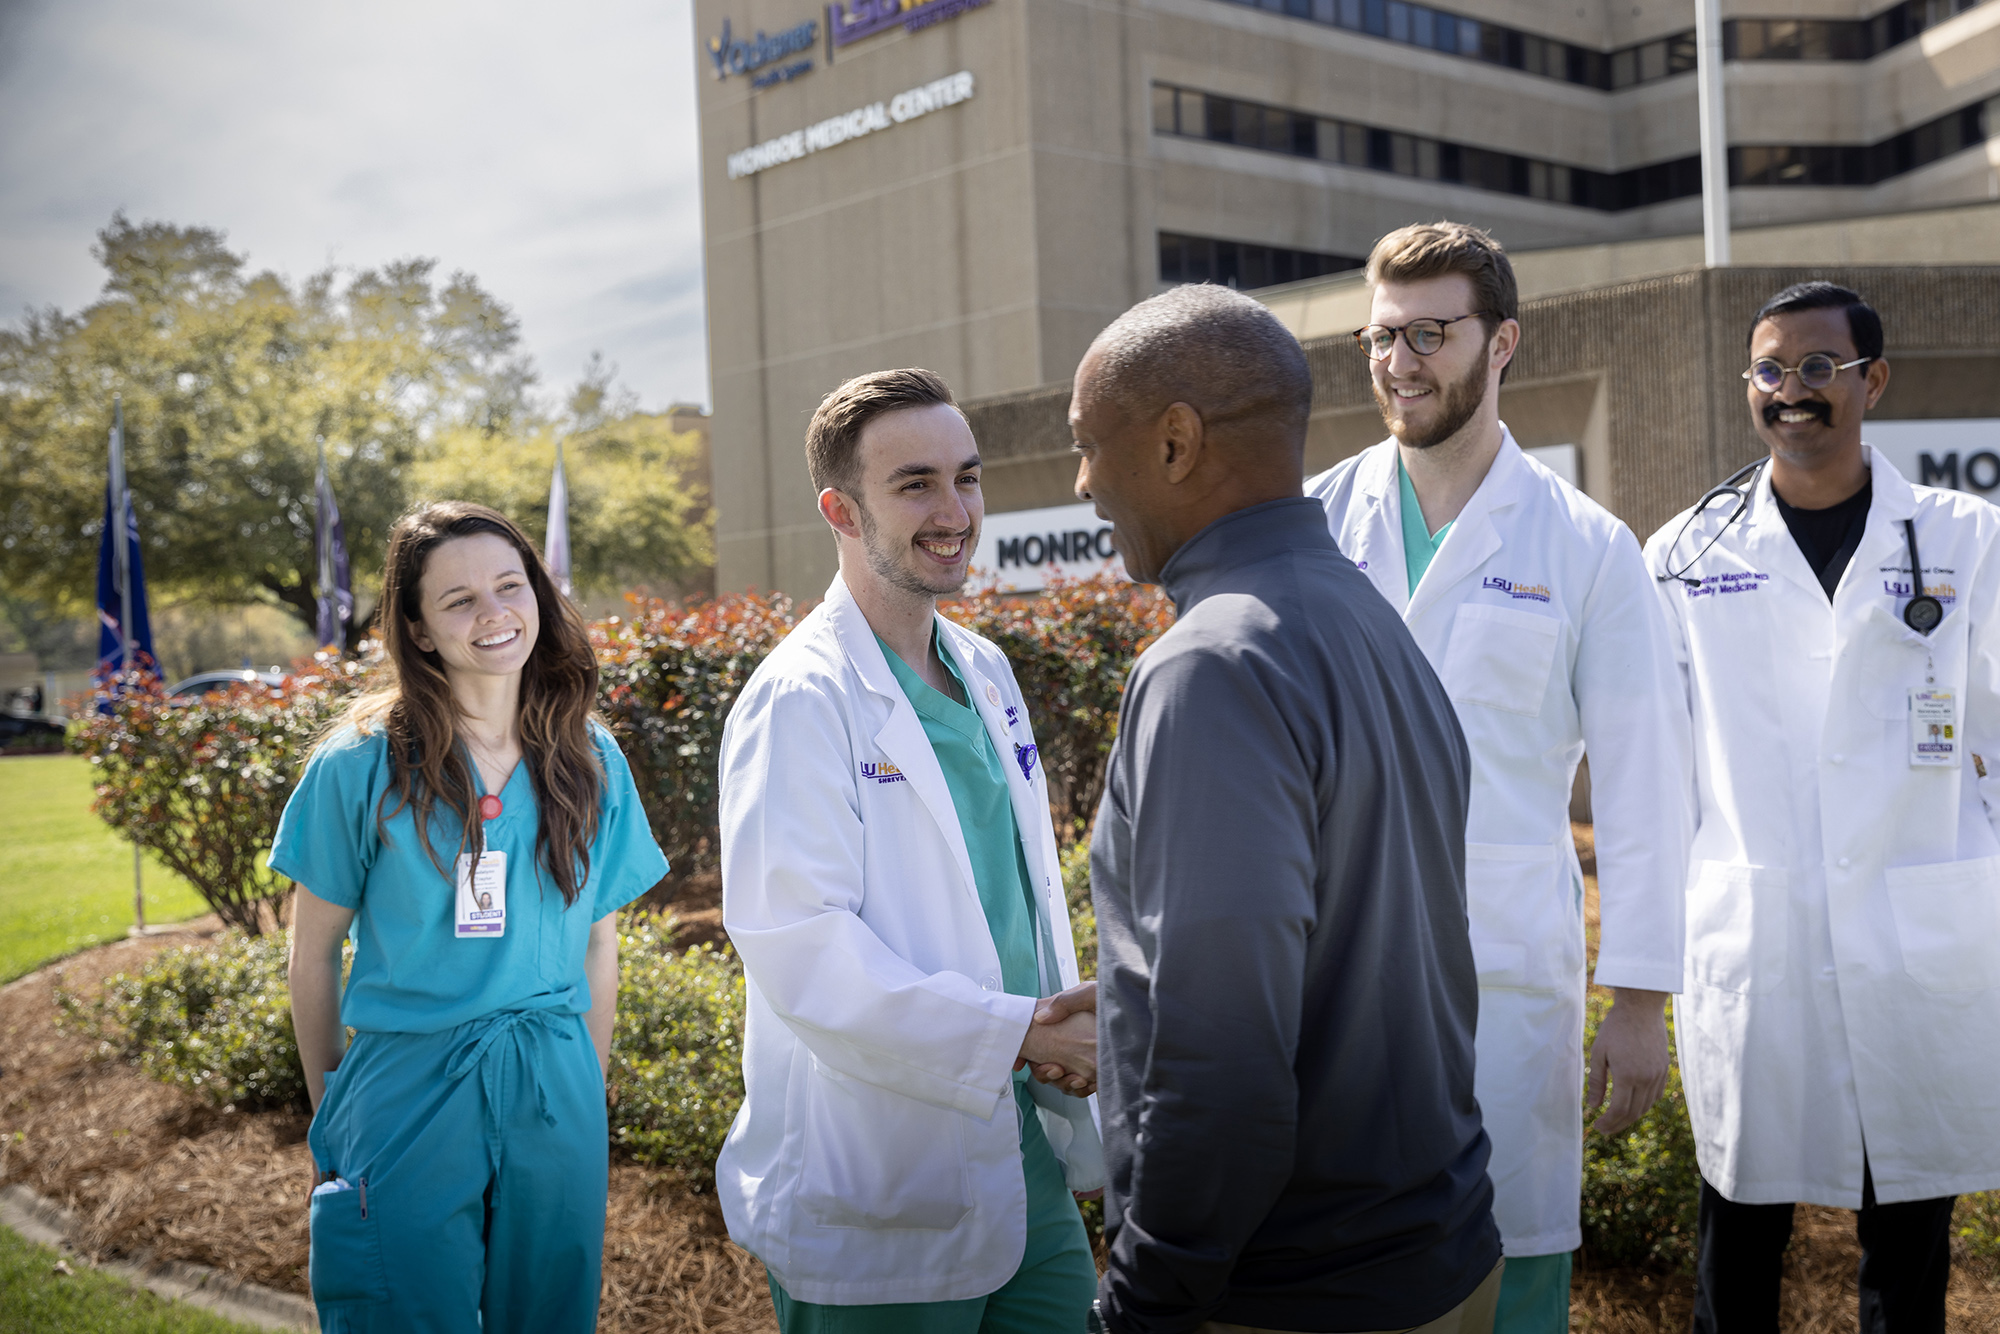 President Tate meets with medical students